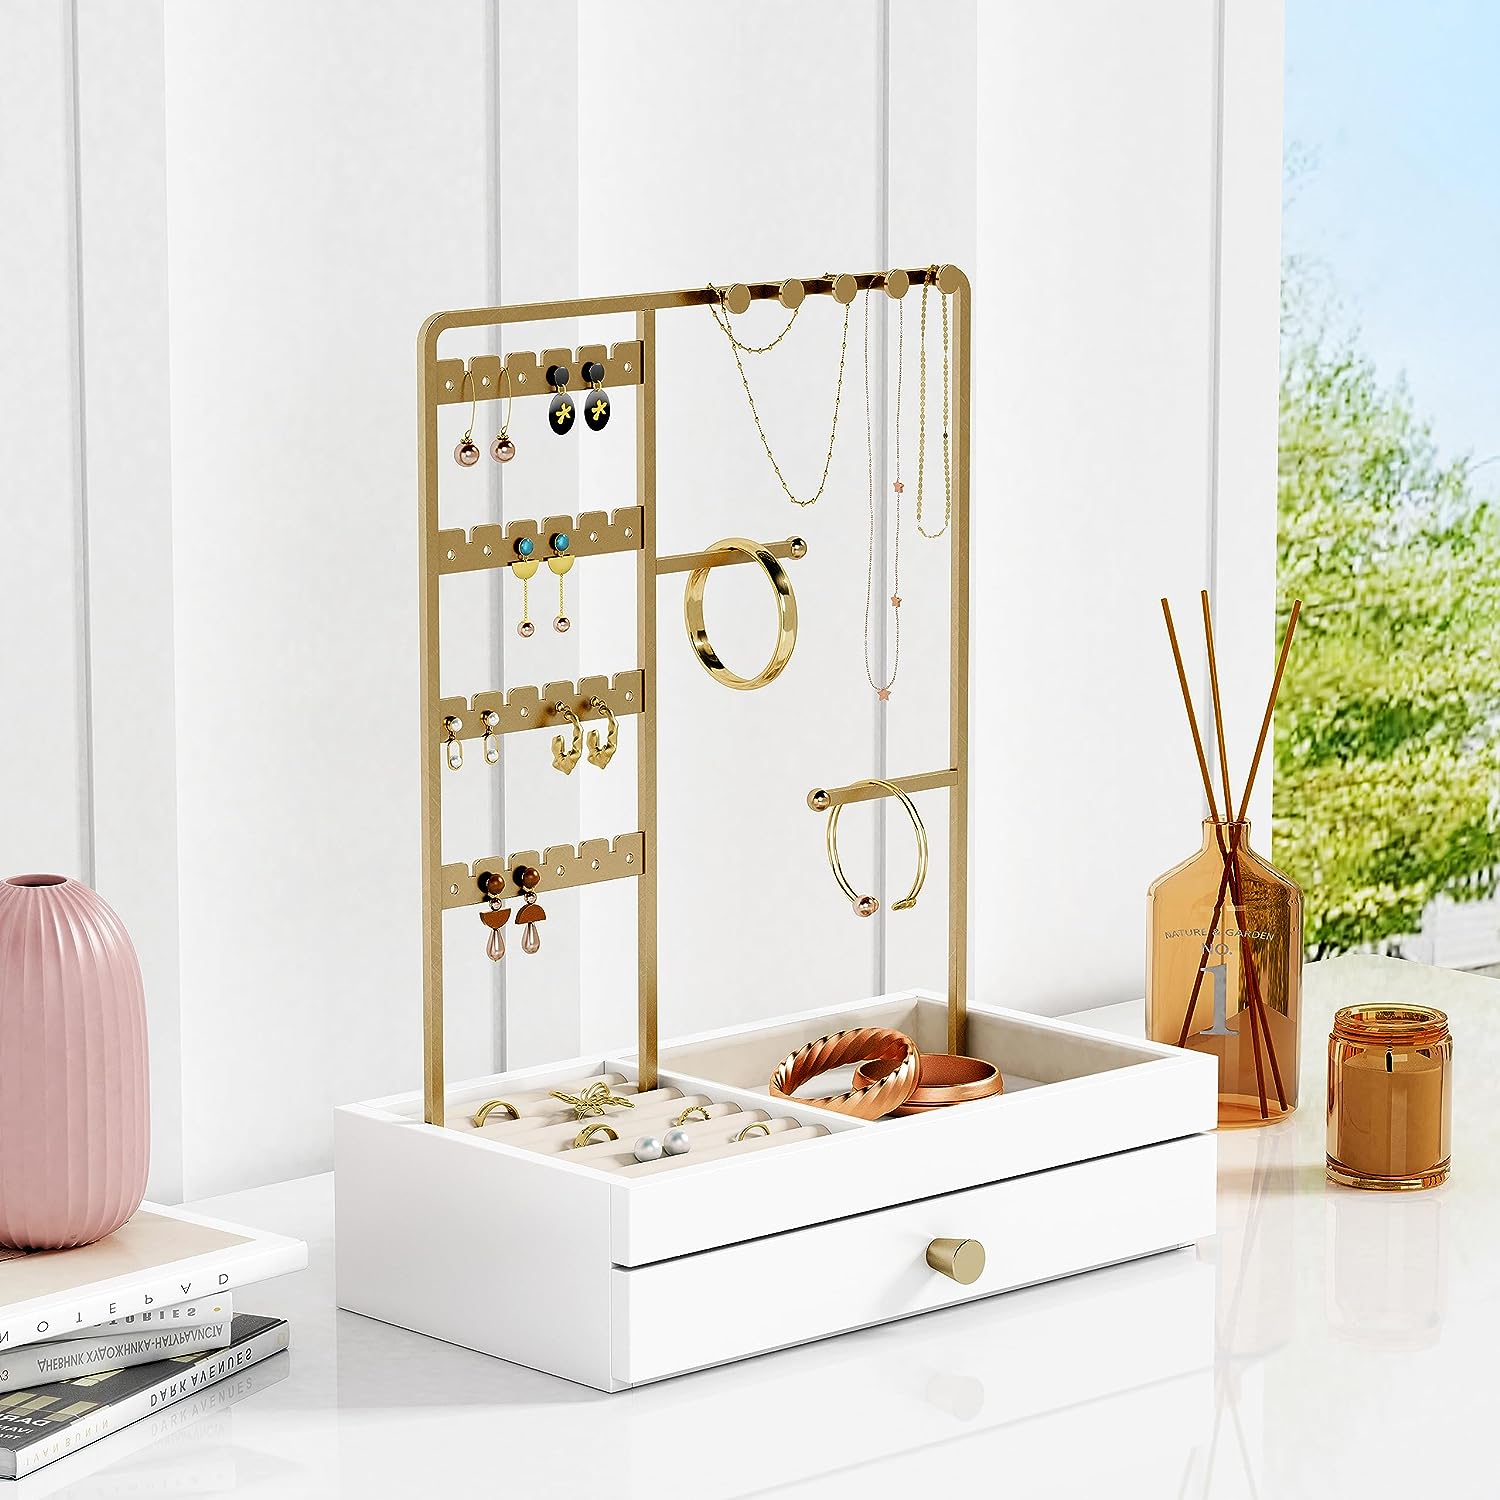 Goozii Jewelry Holder Organizer Stand for Women Girls, Aesthetic Rings Earring Bracelet Necklace Holder for Vanity Dresser, Wood Jewelry Hanger Tree with Tray Drawer Storage Box -White and Gold